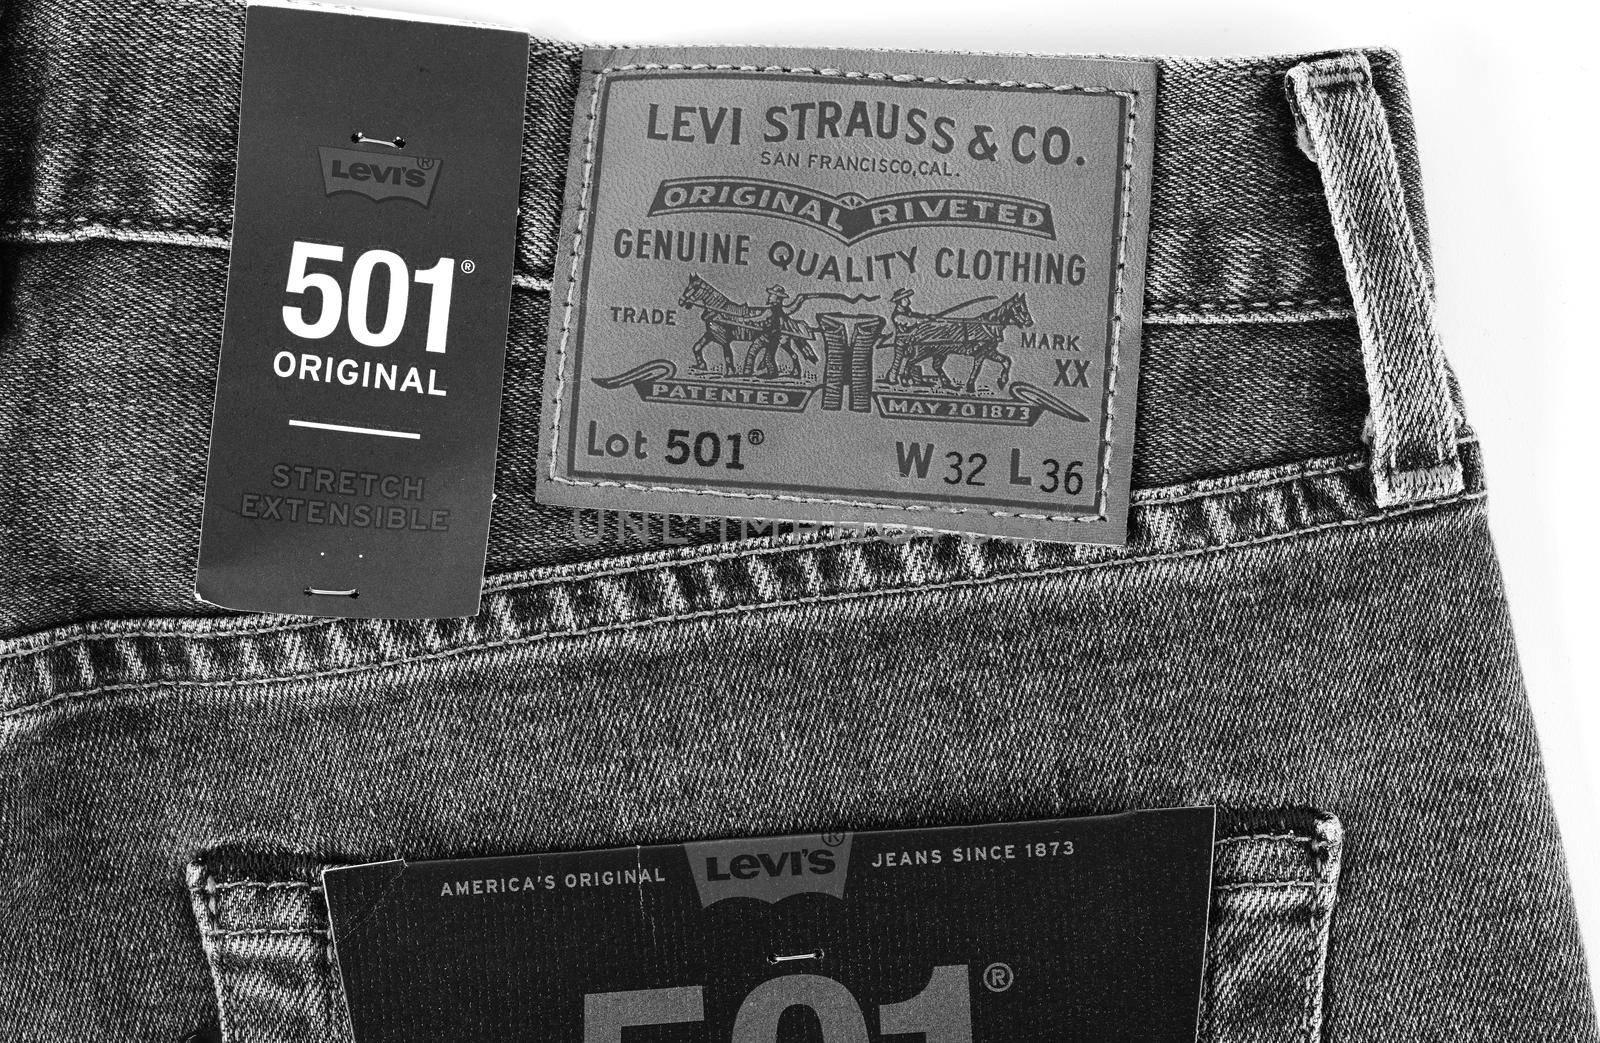 Levi's logo and badges is displayed on Levi Strauss 501 jeans. New LEVI'S 501 Jeans. Classic jeans model. LEVI'S is a brand name of Levi Strauss and Co, founded in 1853. 31.12.2021, Rostov, Russia by EvgeniyQW